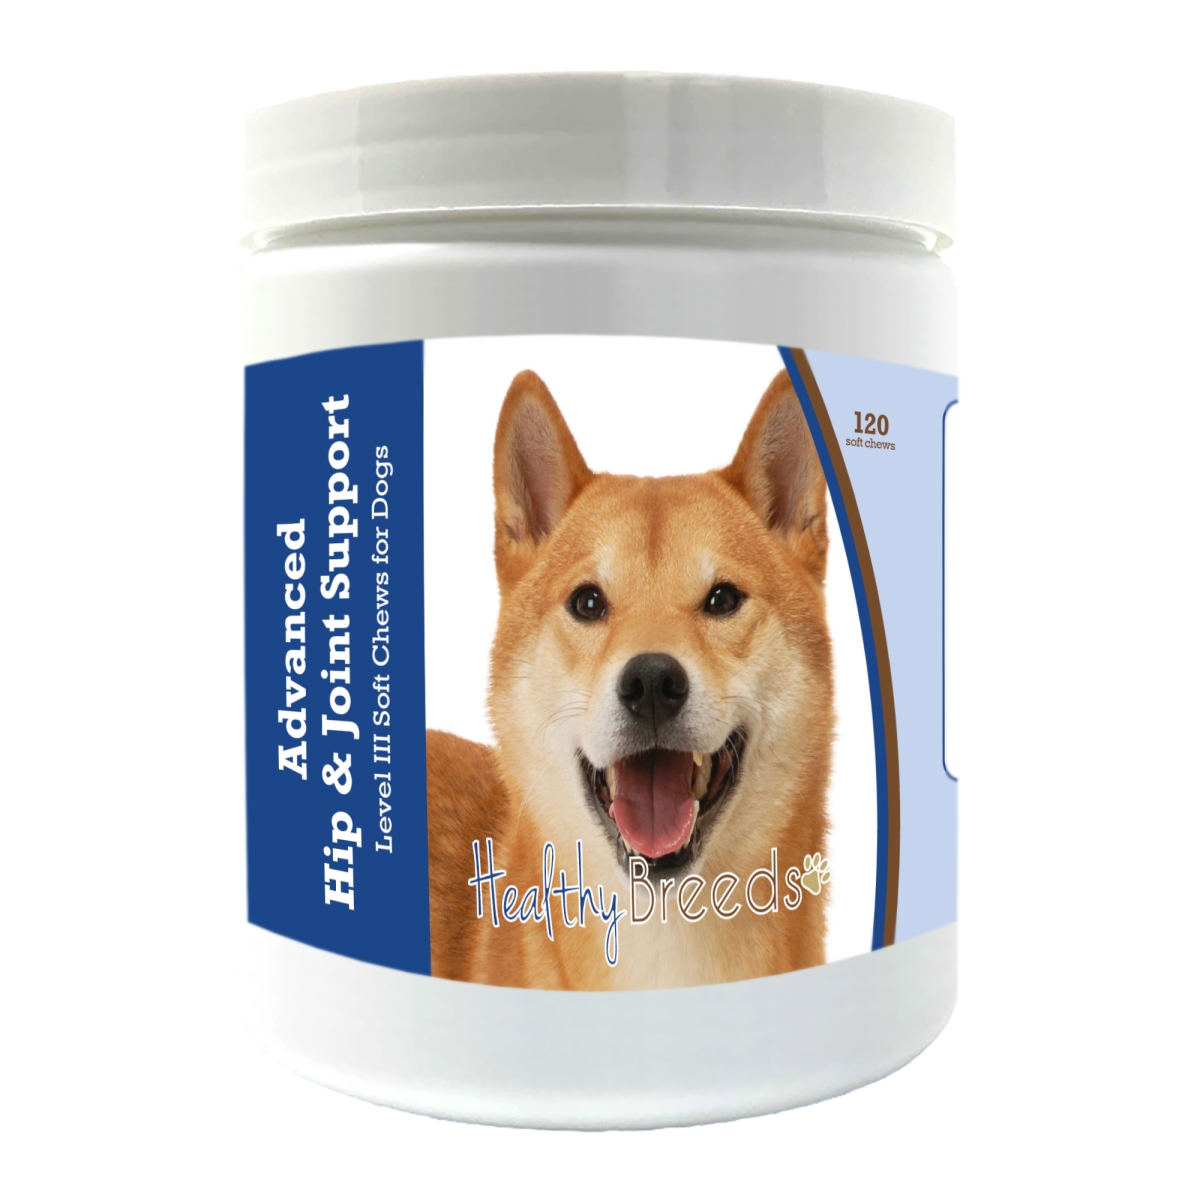 Picture of Healthy Breeds 192959899269 Shiba Inu Advanced Hip & Joint Support Level III Soft Chews for Dogs